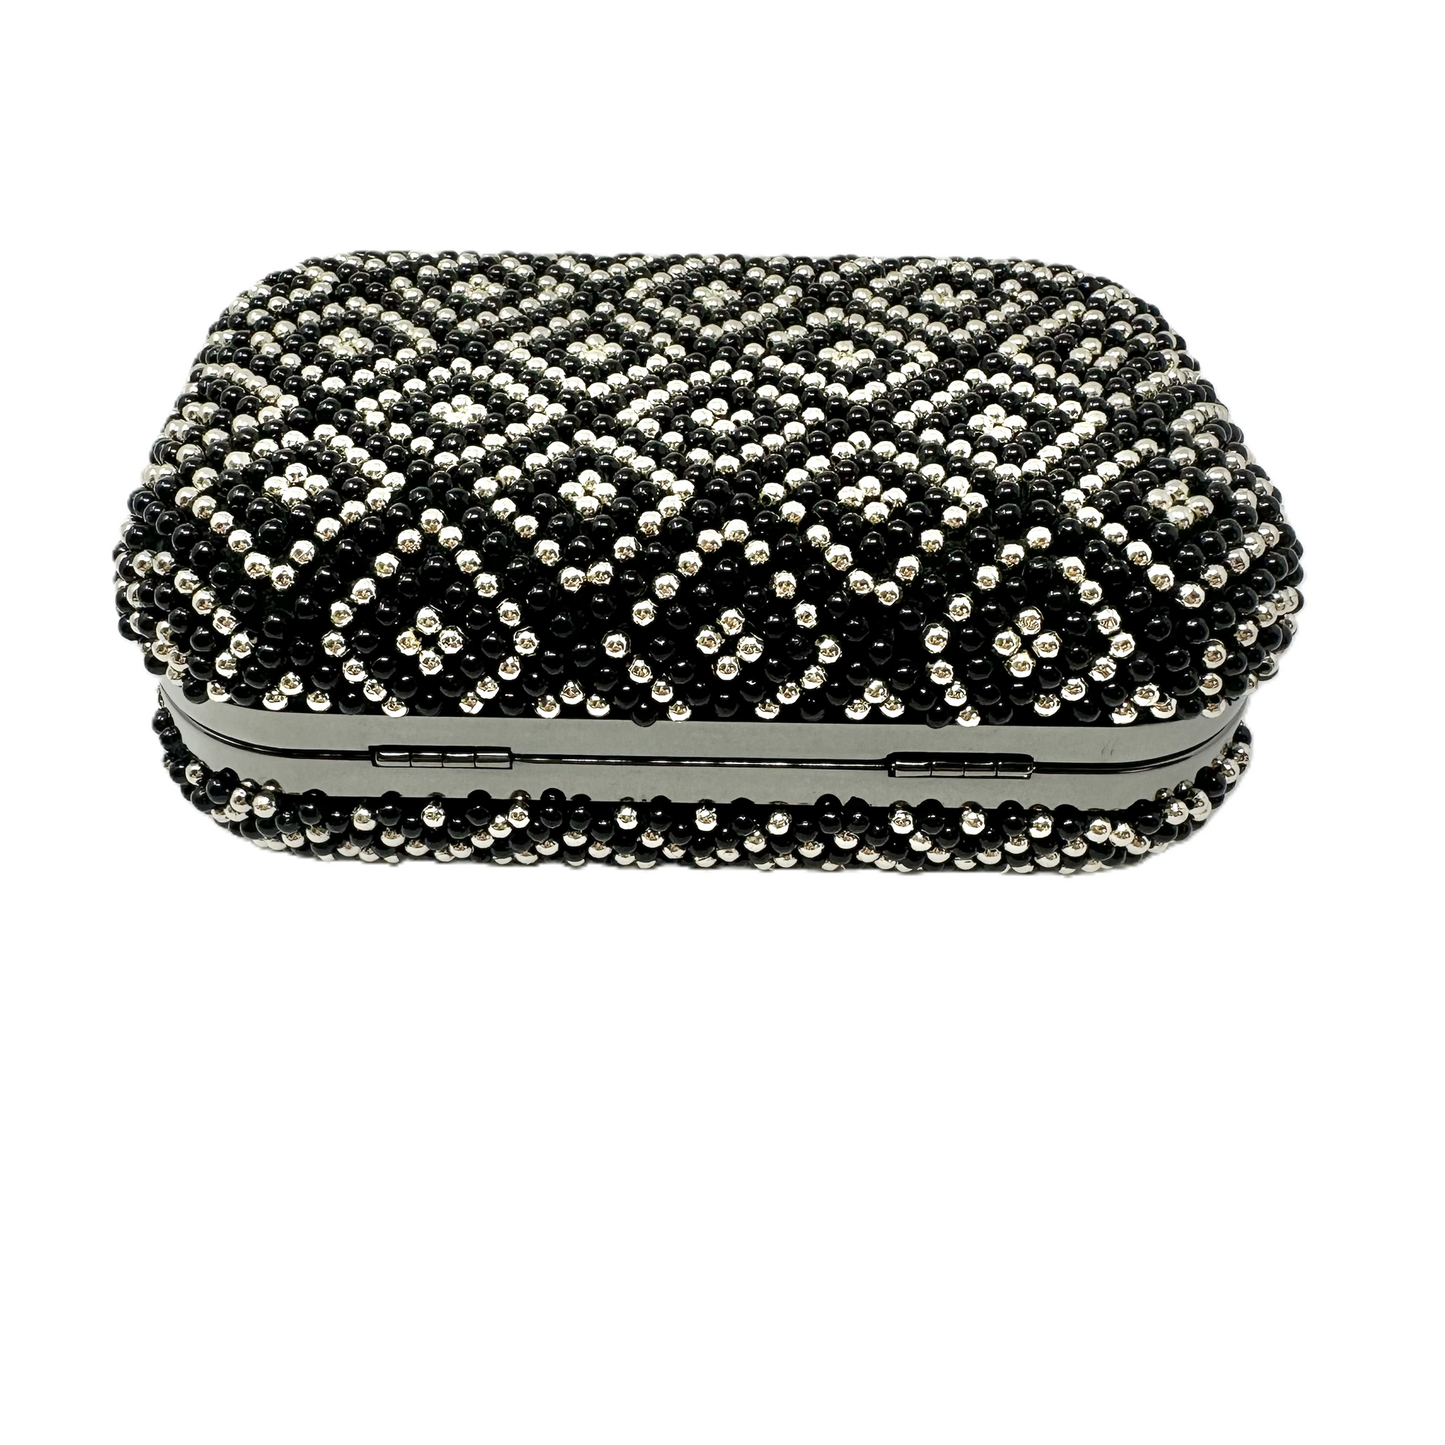 Clutch Designer By Alice + Olivia  Size: Small